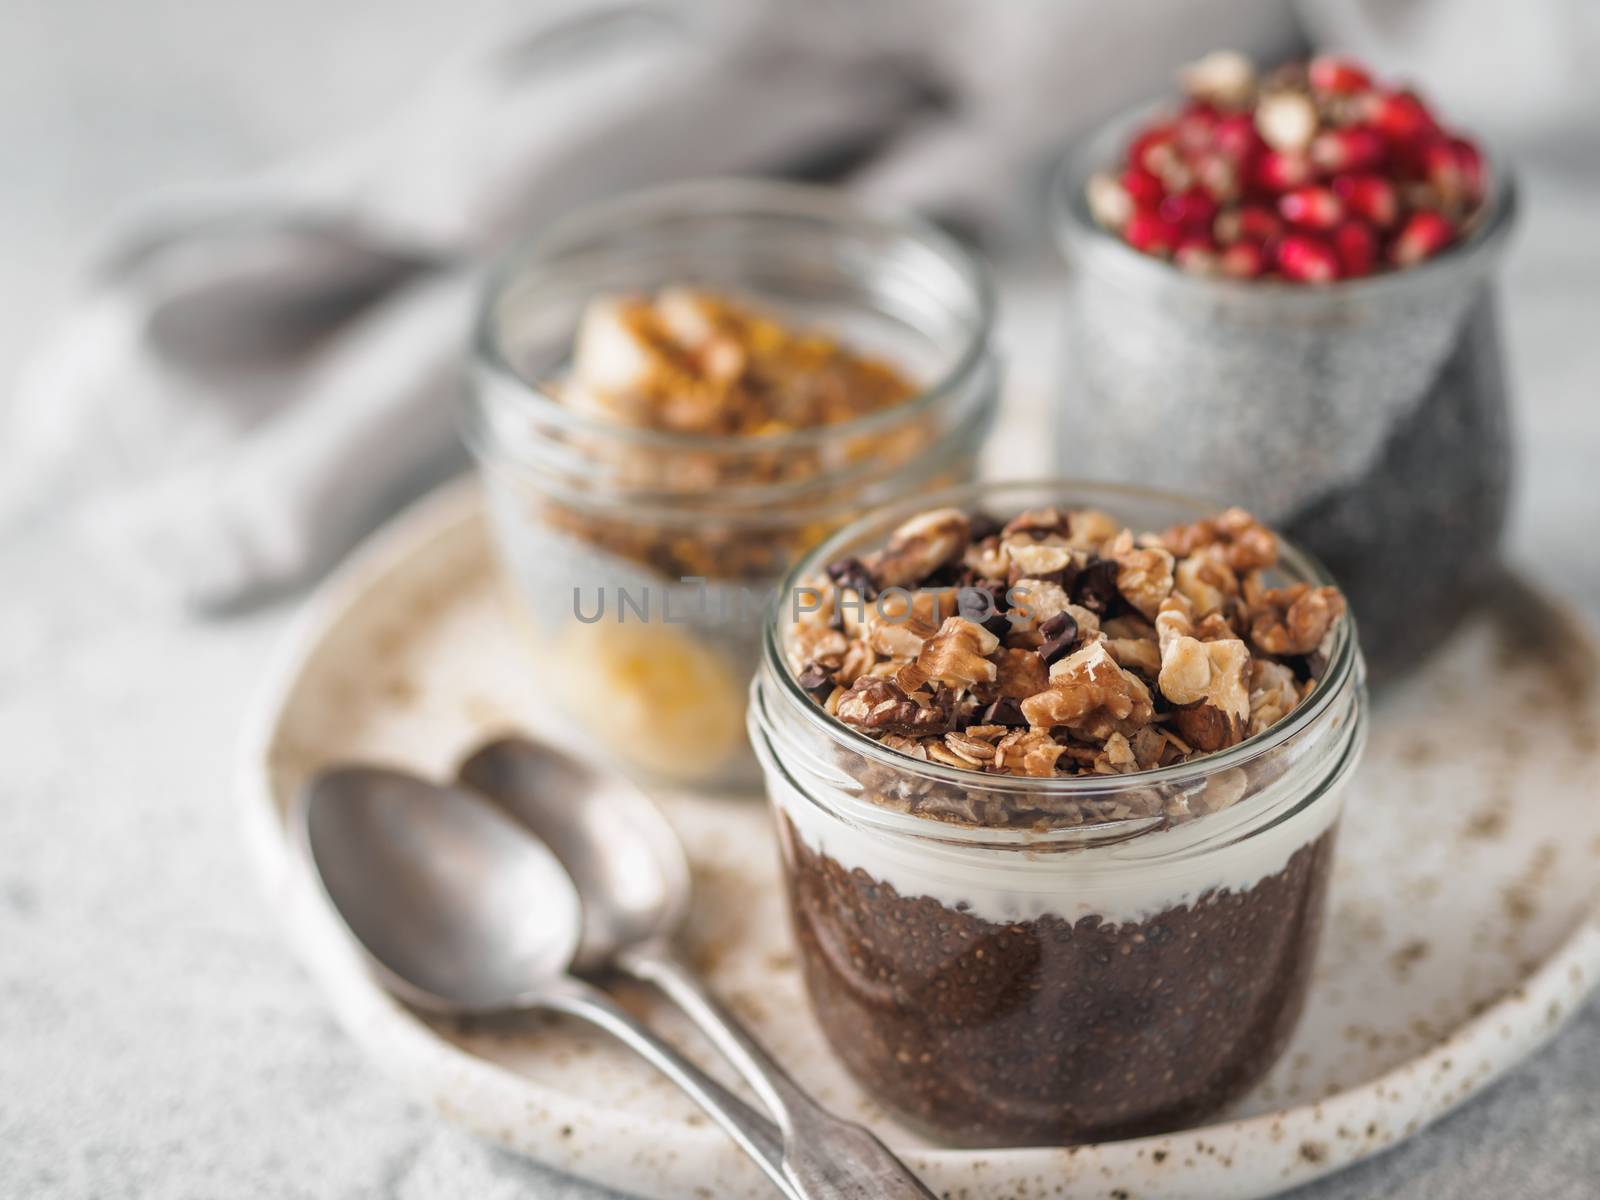 Set of chia pudding in different glass jars on table. Assortment of chia puding with different fruits, nuts,ingredients. Copy space for text. Superfood, detox,healthy overnight breakfast concept